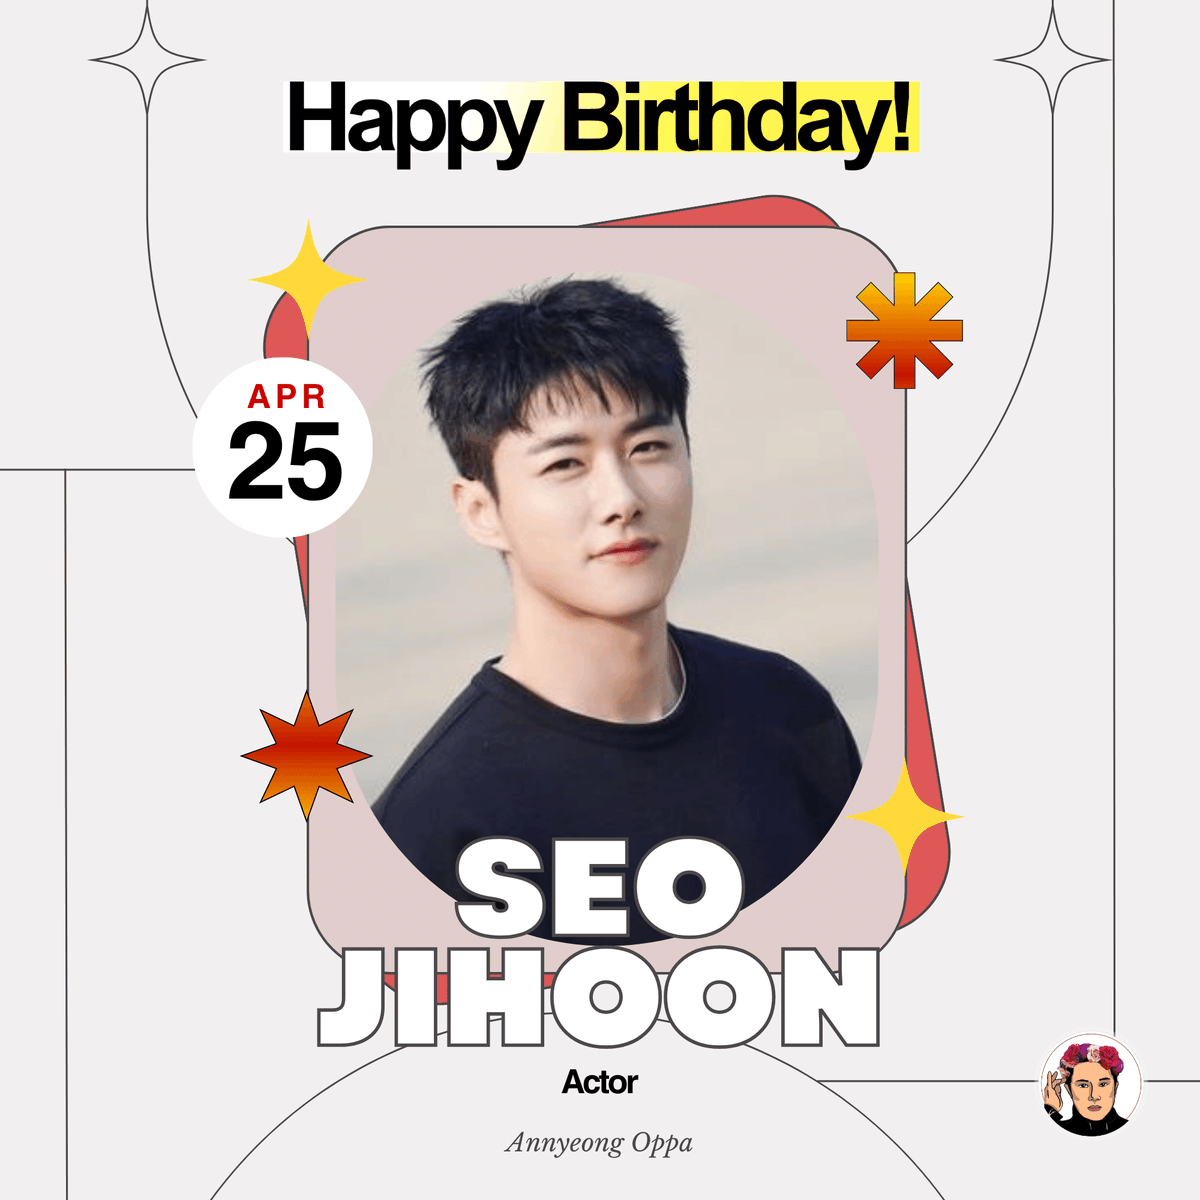 Today is Seo Jihoon's special day! 🥳 Happiest birthday to the talented Seo Jihoon! May your day be blessed and filled with happiness and joy! ❤️🎉 For more K-drama updates, visit: annyeongoppa.com #HappySeoJihoonDay